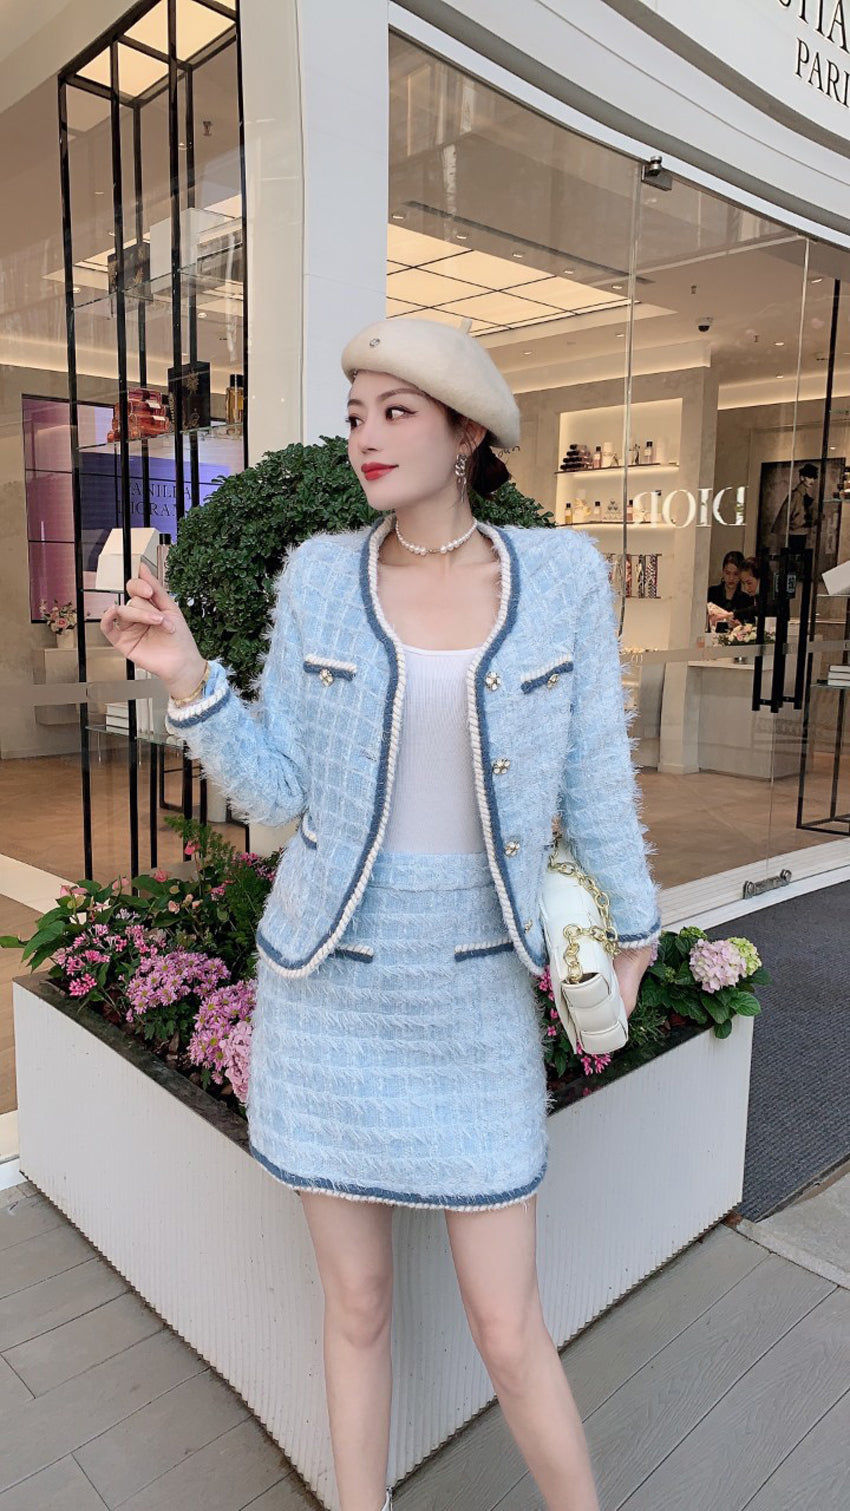 CHANEL SUIT - SKIRT AND JACKET